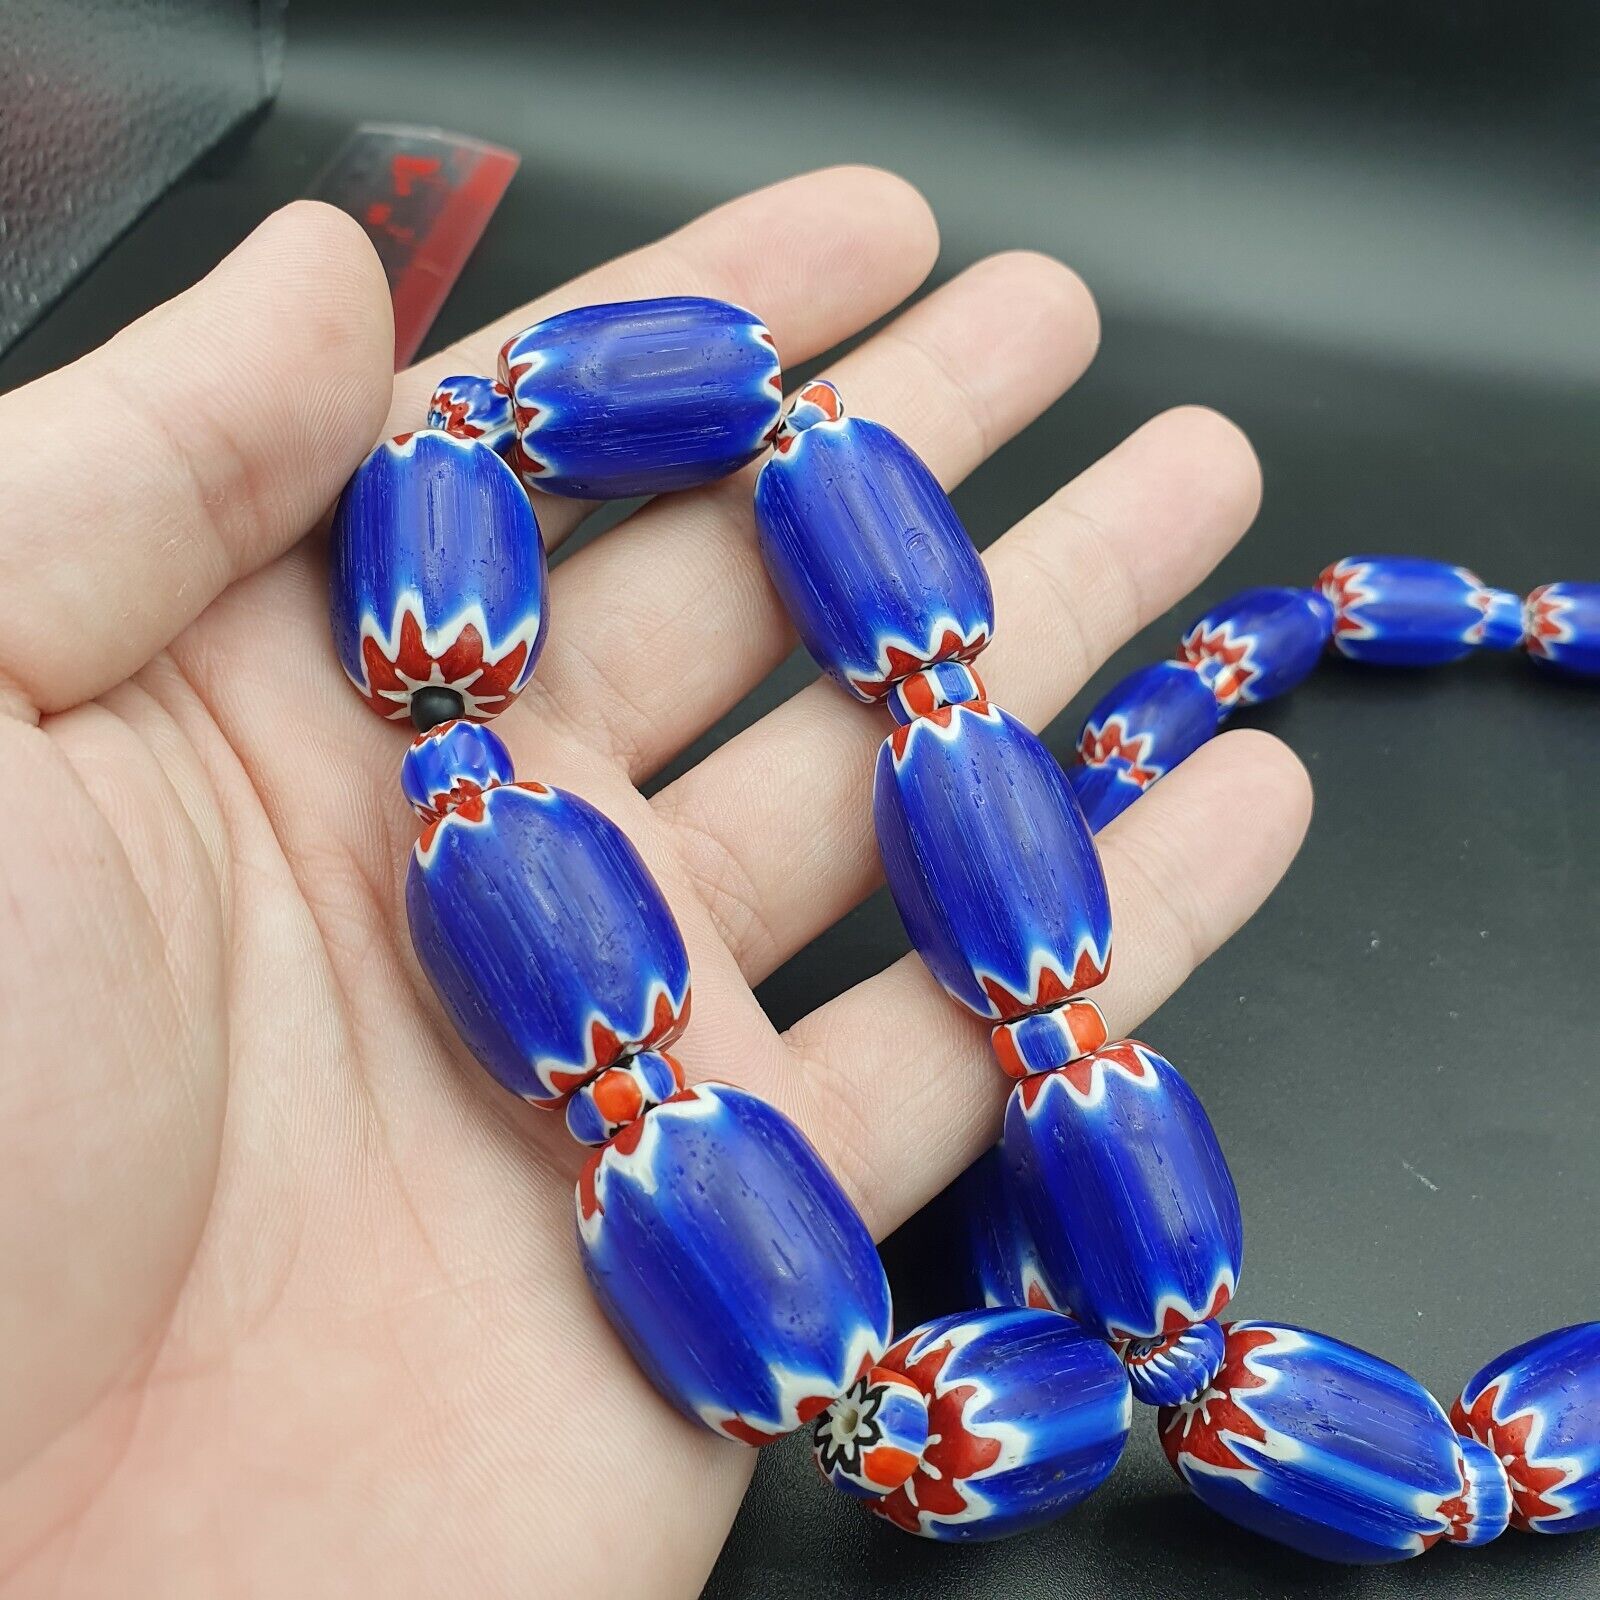 Venetian Style Trade beads Old African Chevron Glass Beads Long Strand